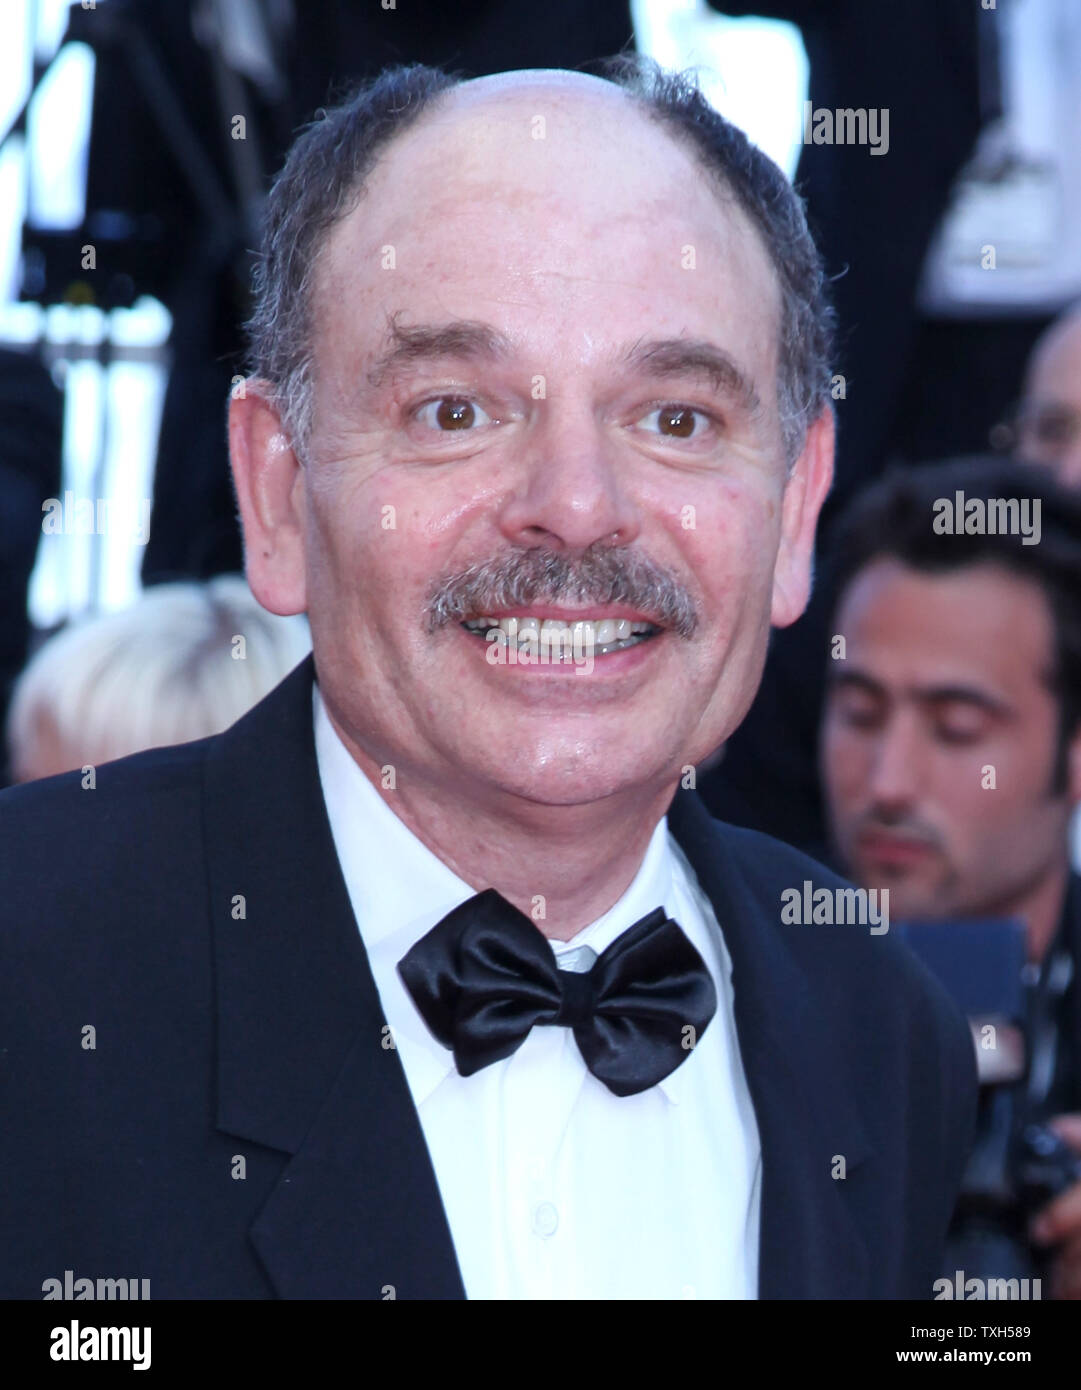 Jean-Pierre Darroussin arrives on the red carpet before the screening of the film 'Utomlyonnye Solntsem 2 (The Exodus - Burnt By The Sun 2)' during the 63rd annual Cannes International Film Festival in Cannes, France on May 22, 2010.  UPI/David Silpa Stock Photo